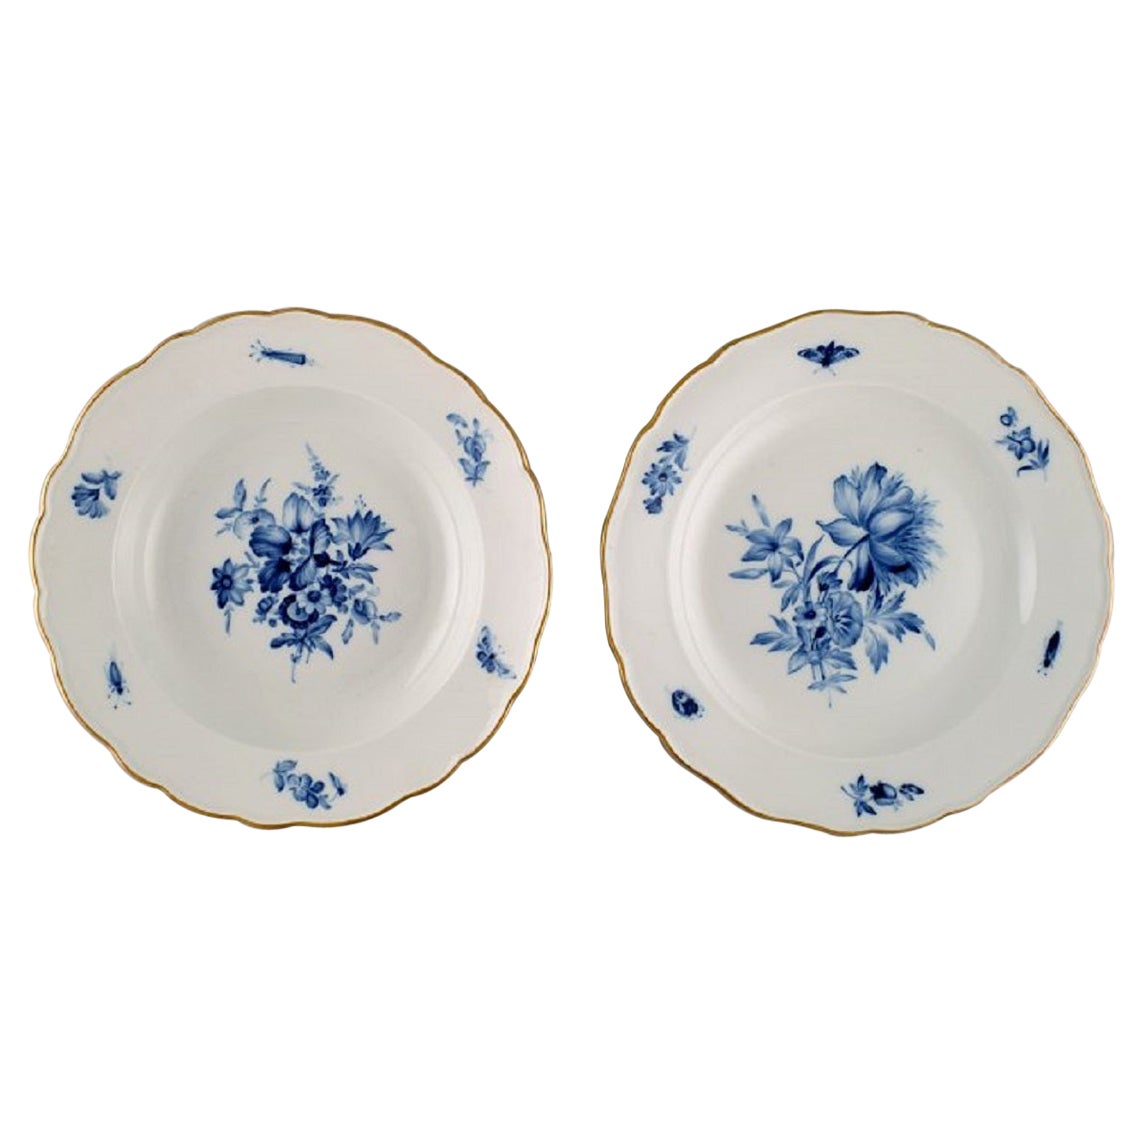 Two Antique Meissen Porcelain Plates with Hand-Painted Flowers and Gold Edge